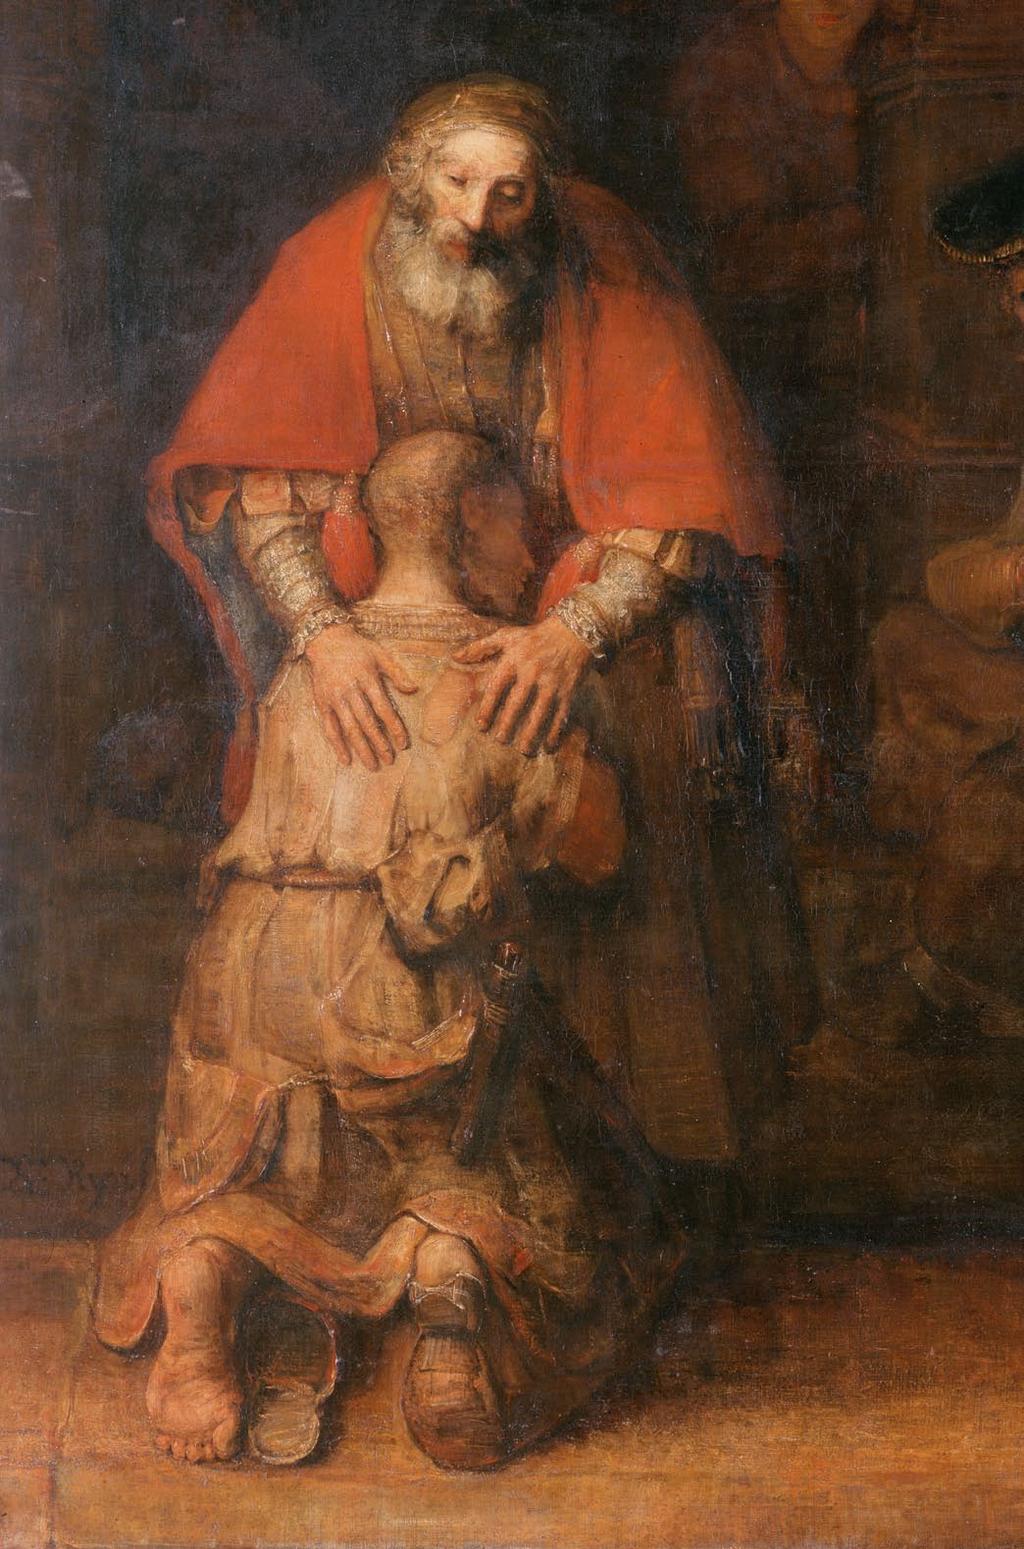 PSALM 103 The Return of the Prodigal Son (1662), Rembrandt.